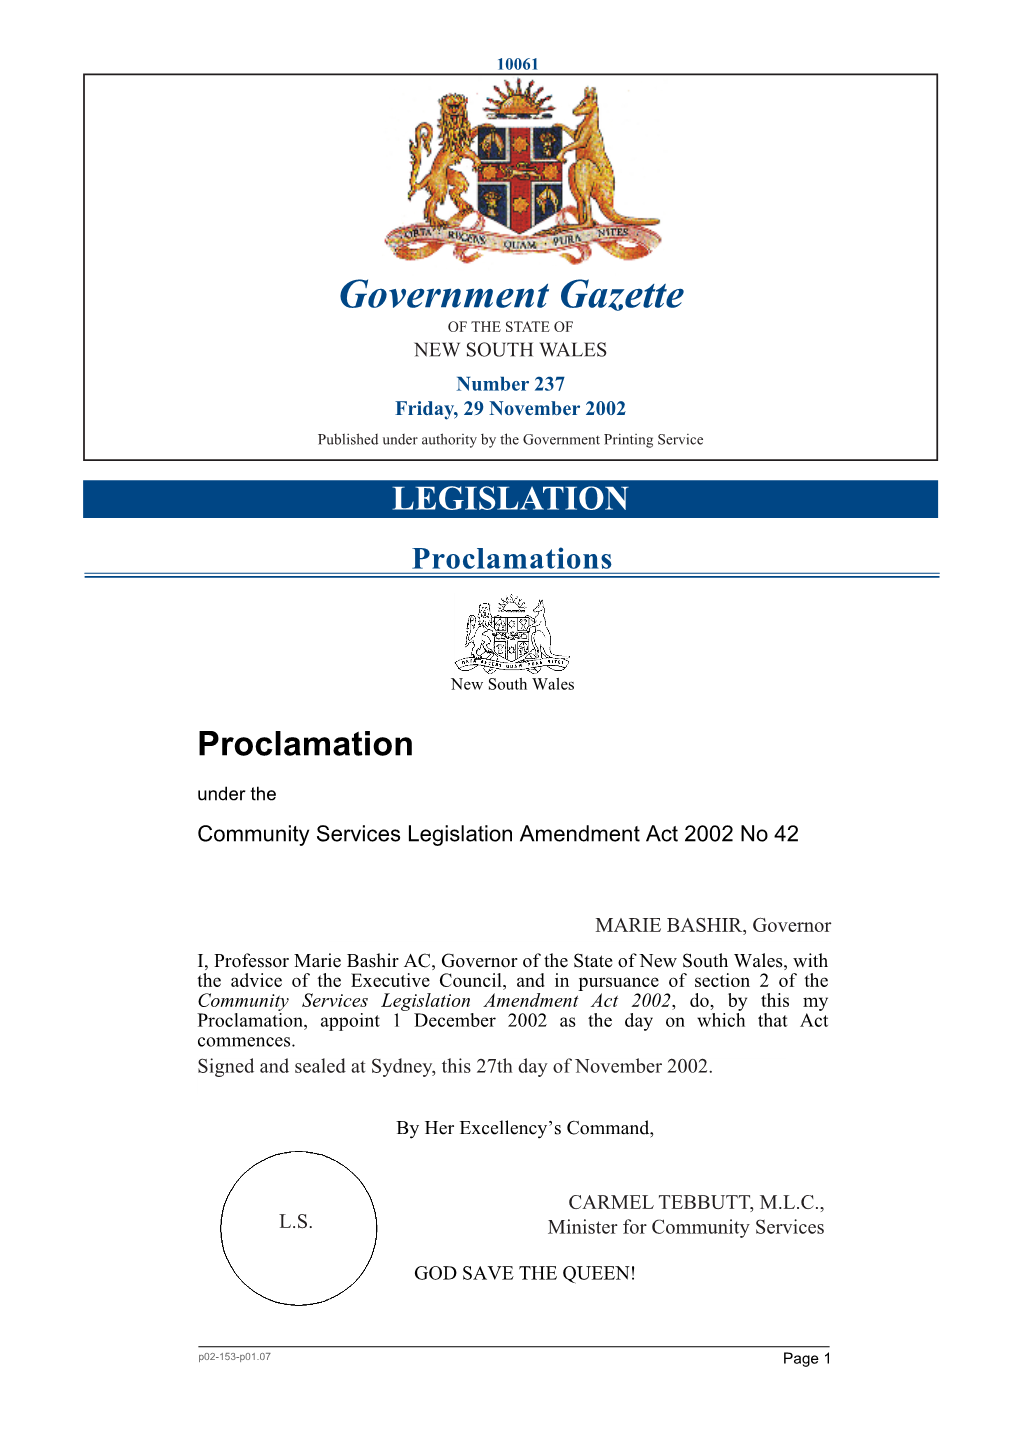 Government Gazette of the STATE of NEW SOUTH WALES Number 237 Friday,New 29 Southnovember Wales 2002 Published Under Authority by the Government Printing Service